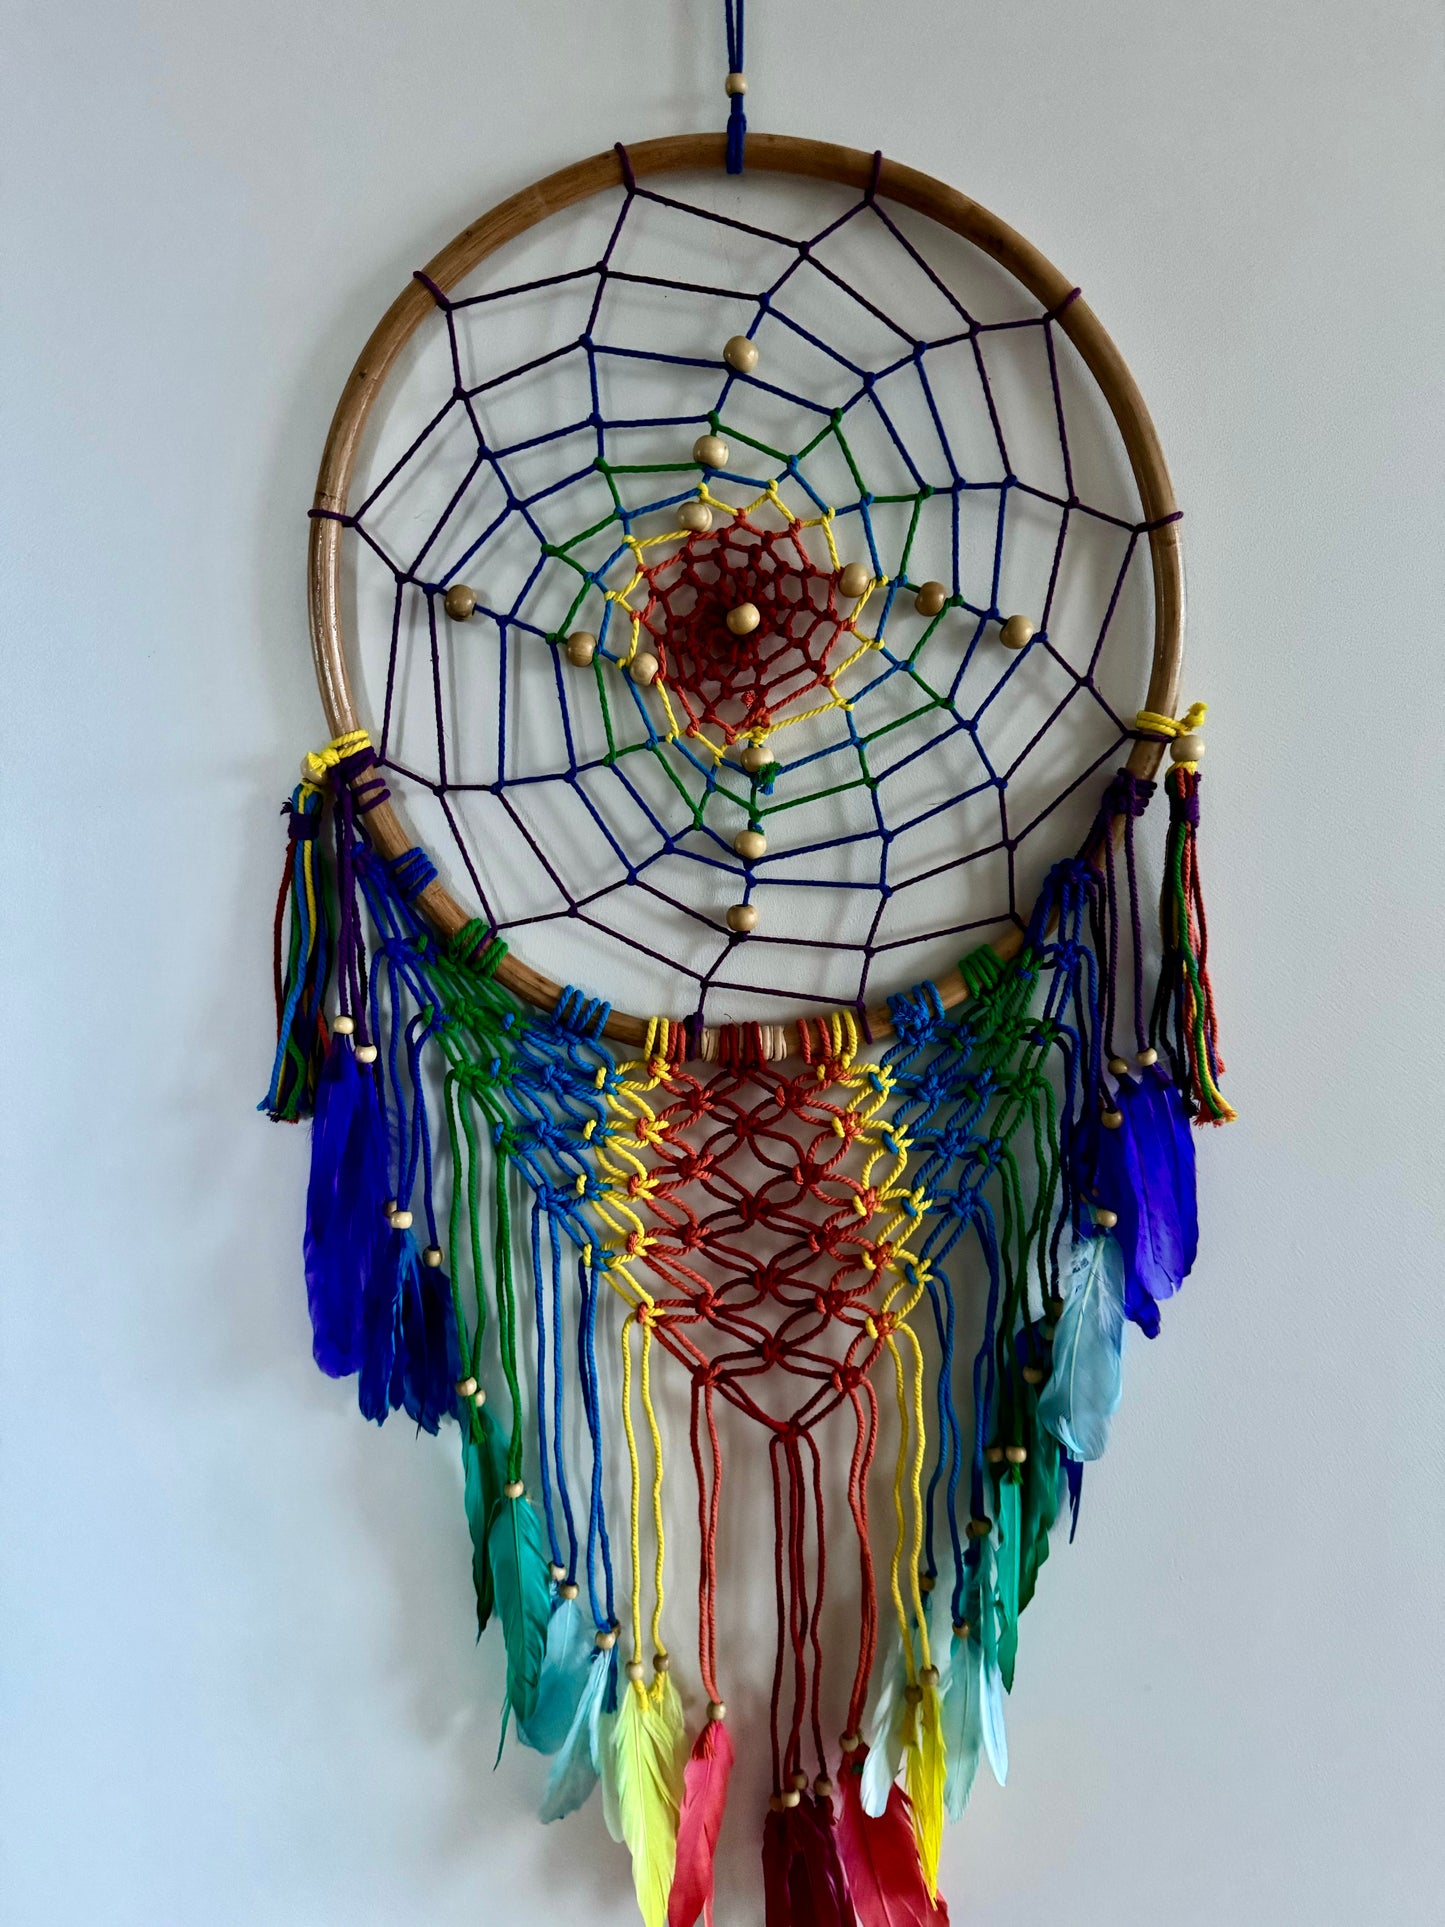 44 cm colored dream catcher with feathers